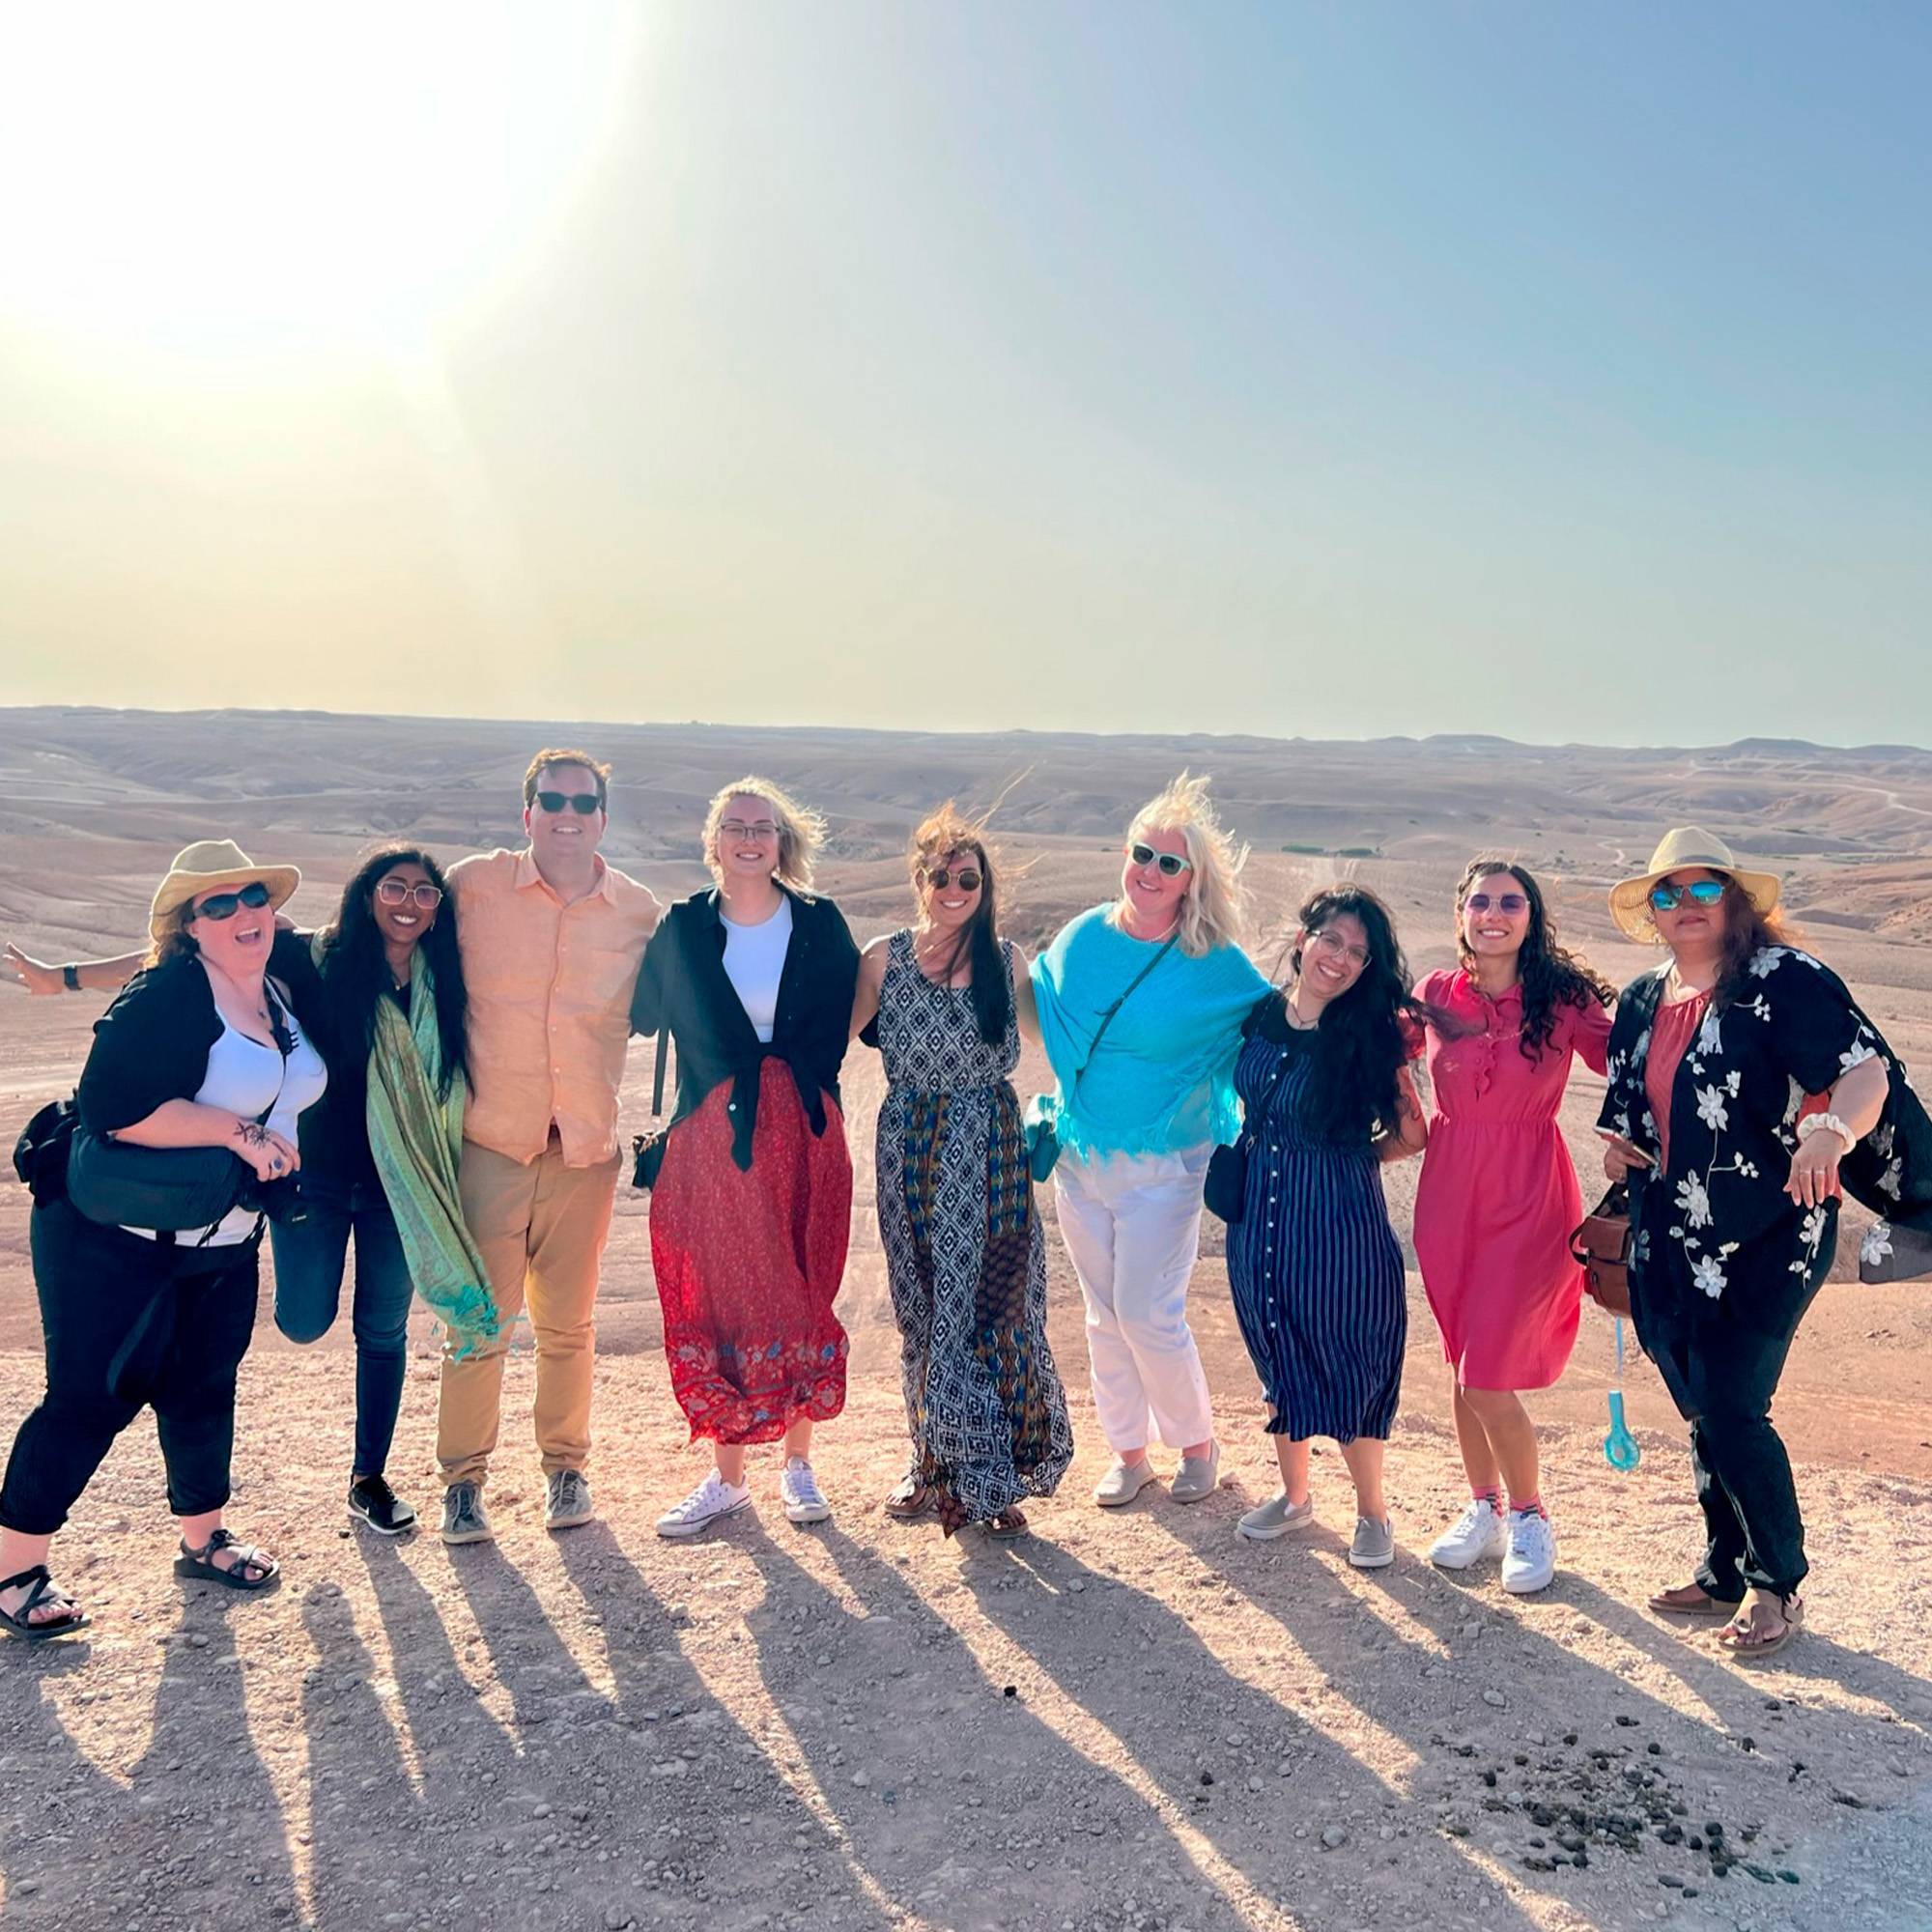 Students and faculty in desert in Morocco